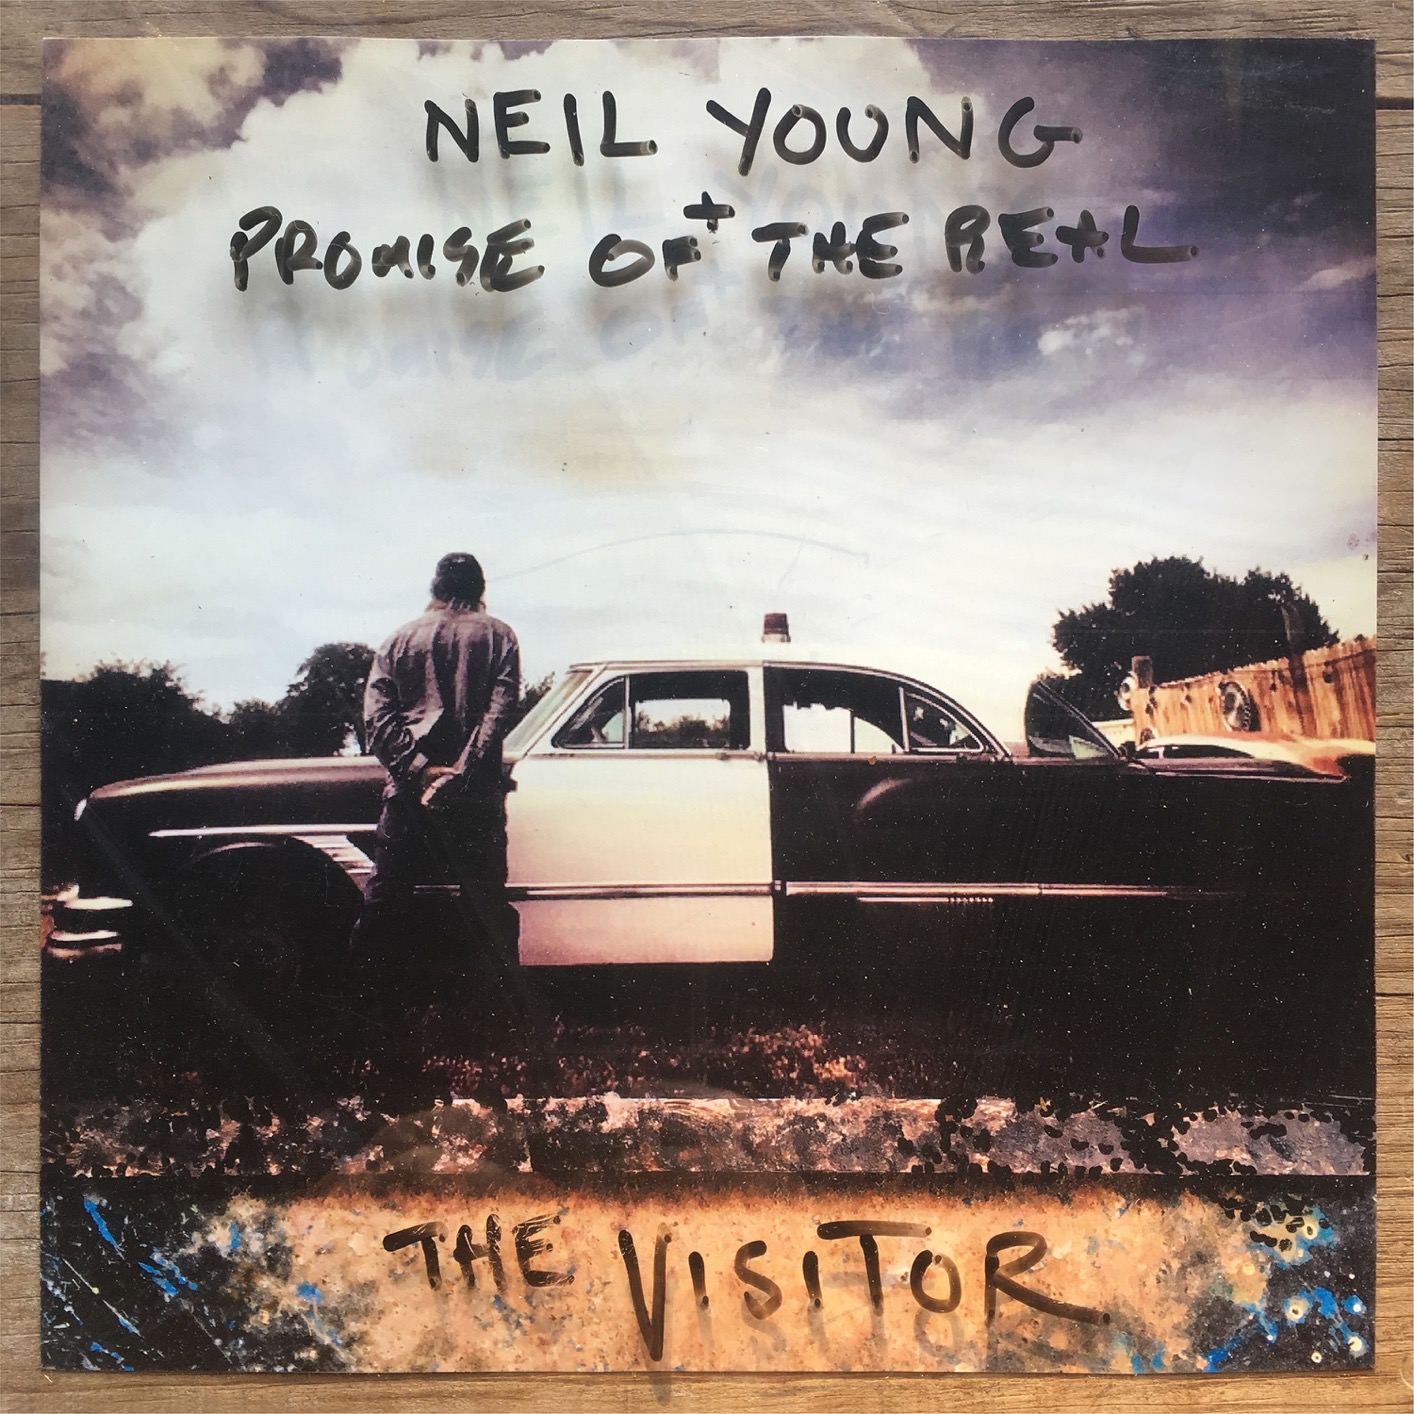 Neil Young & Promise Of The Real – The Visitor (2017) [Qobuz FLAC 24bit/96kHz]